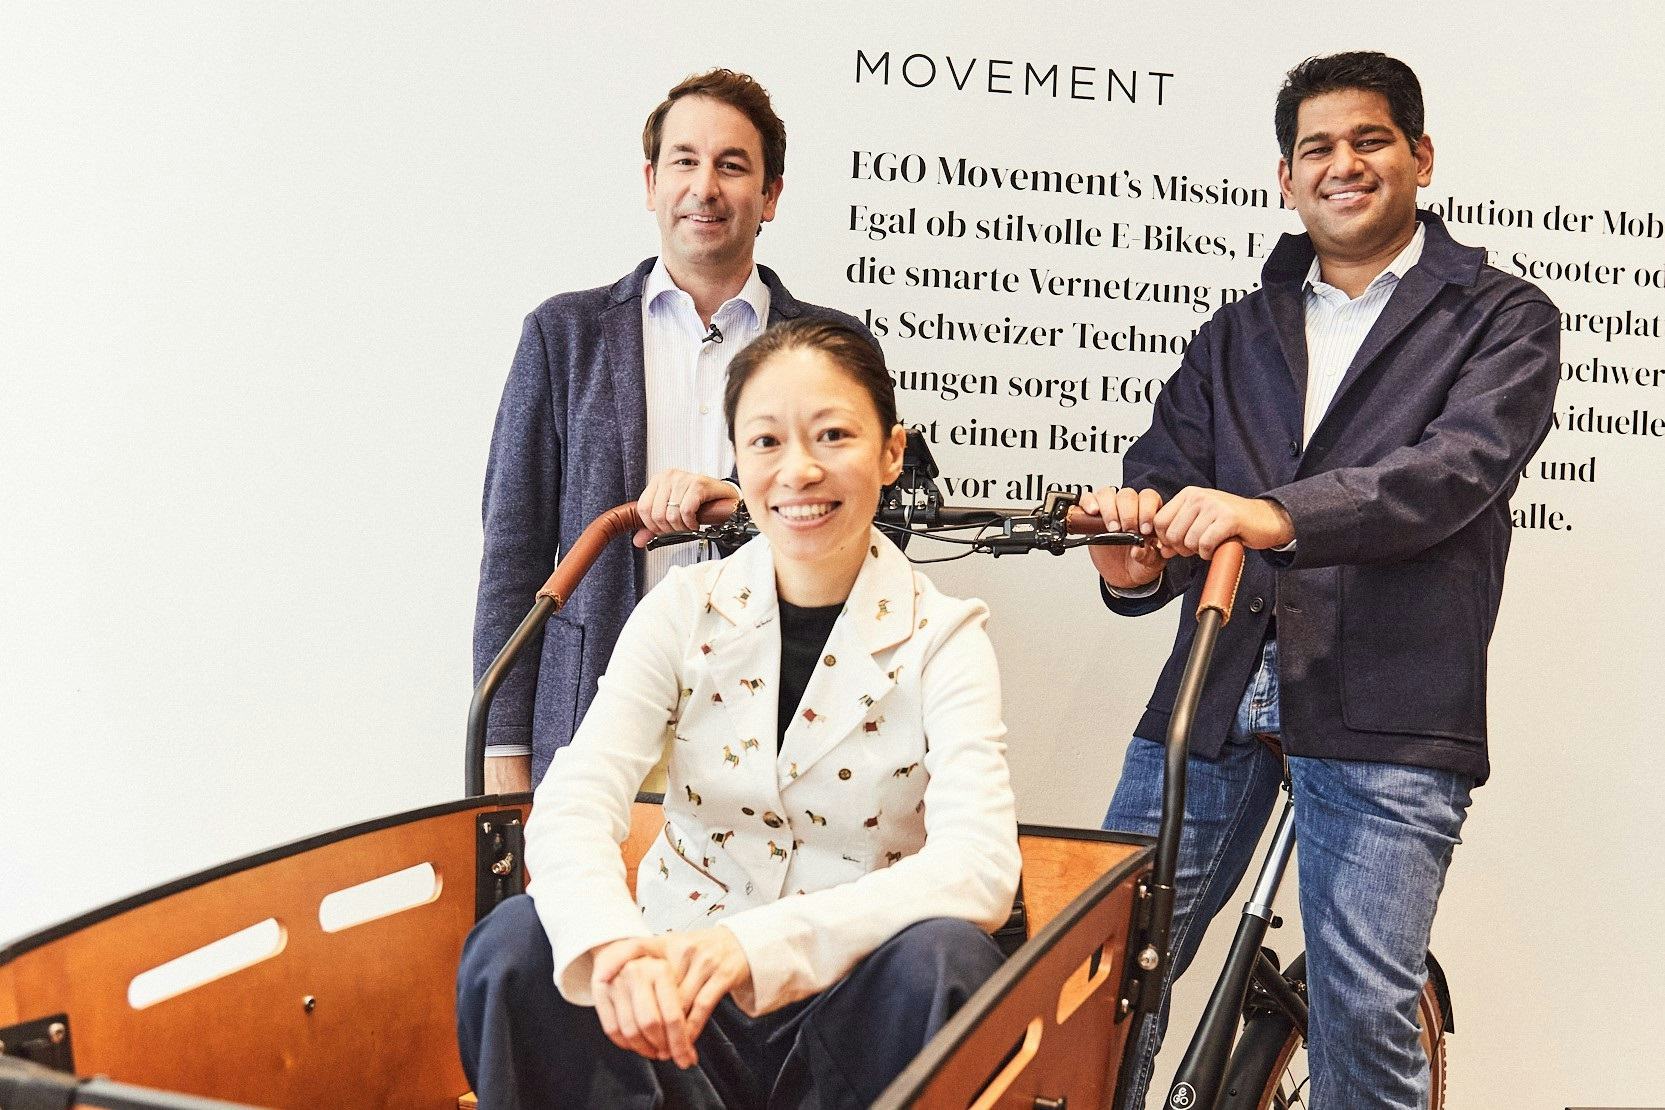 Co-founders of EGO Movement, Daniel Meyer, CEO and Marie So, CSO with Sudarshan Venu, Joint Managing Director of TVS Motor. – Photo Thomas von Aagh